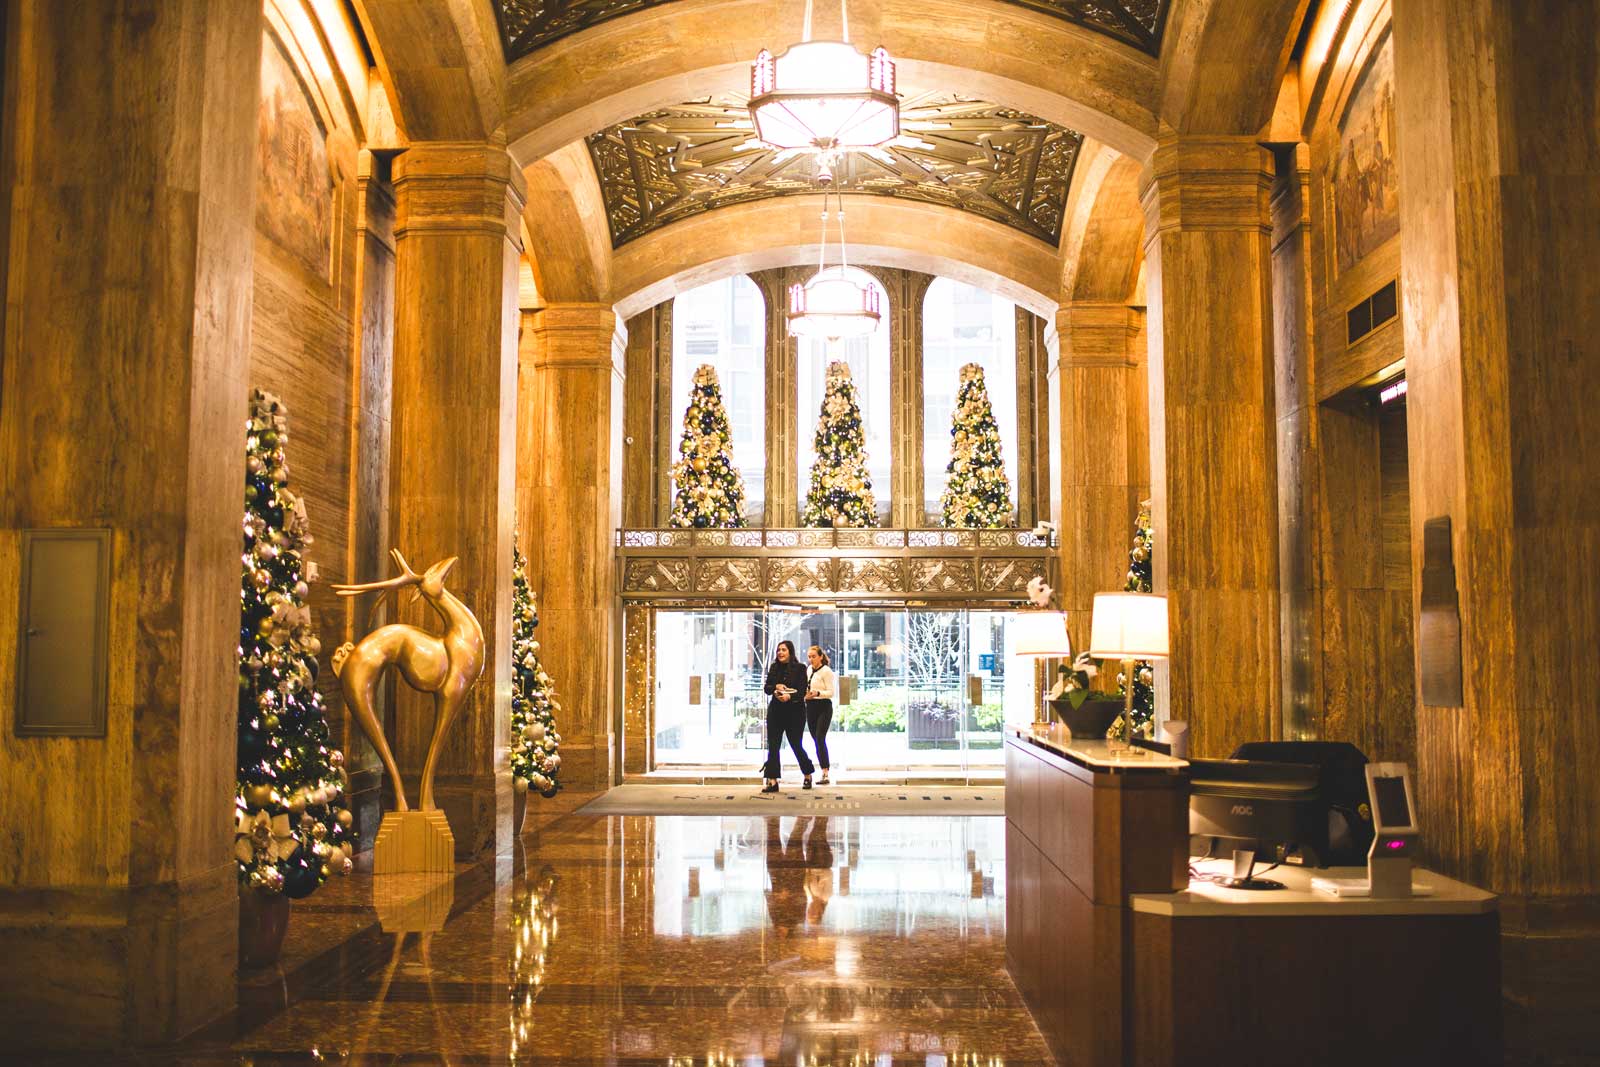 Bank lobby with holiday decorations and trees